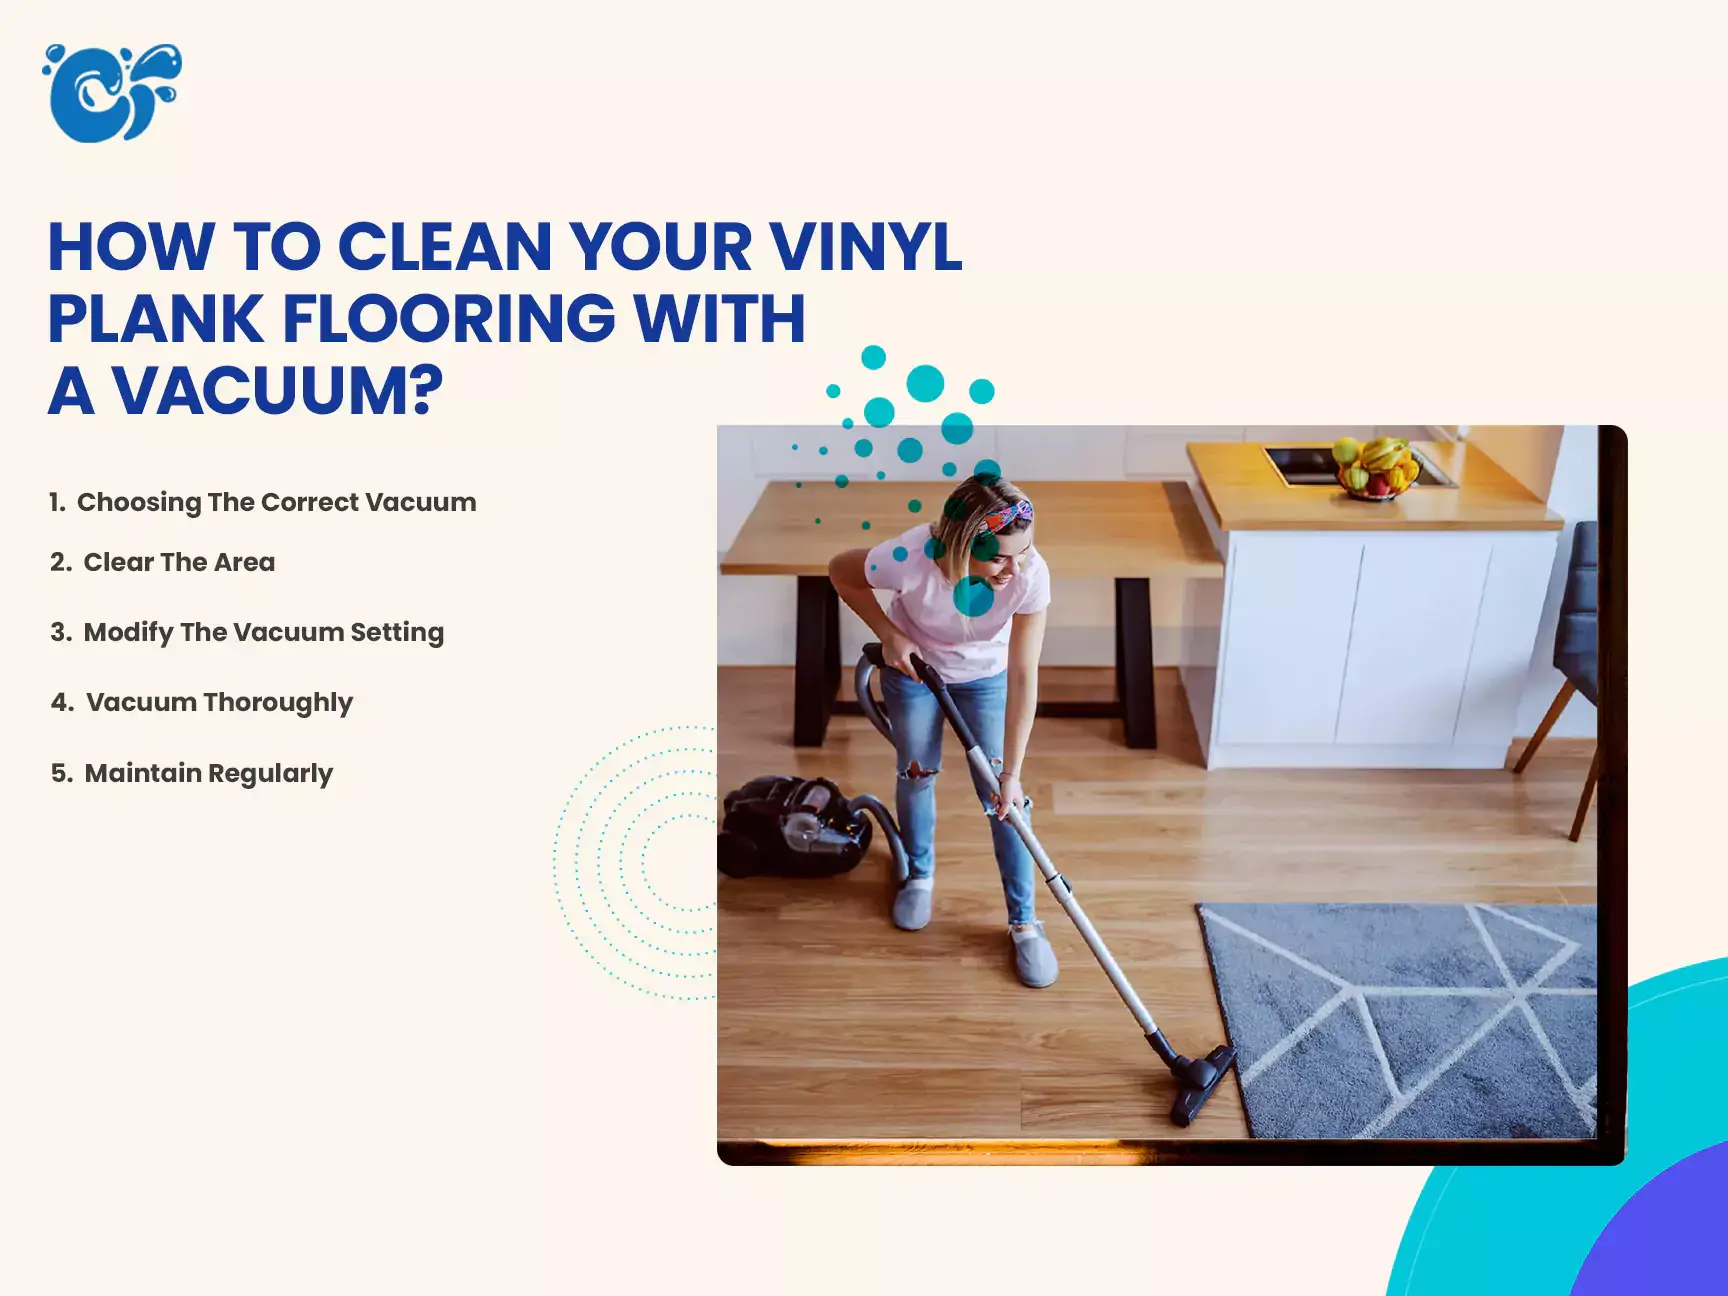 How To Clean Your Vinyl Plank Flooring With A Vacuum?